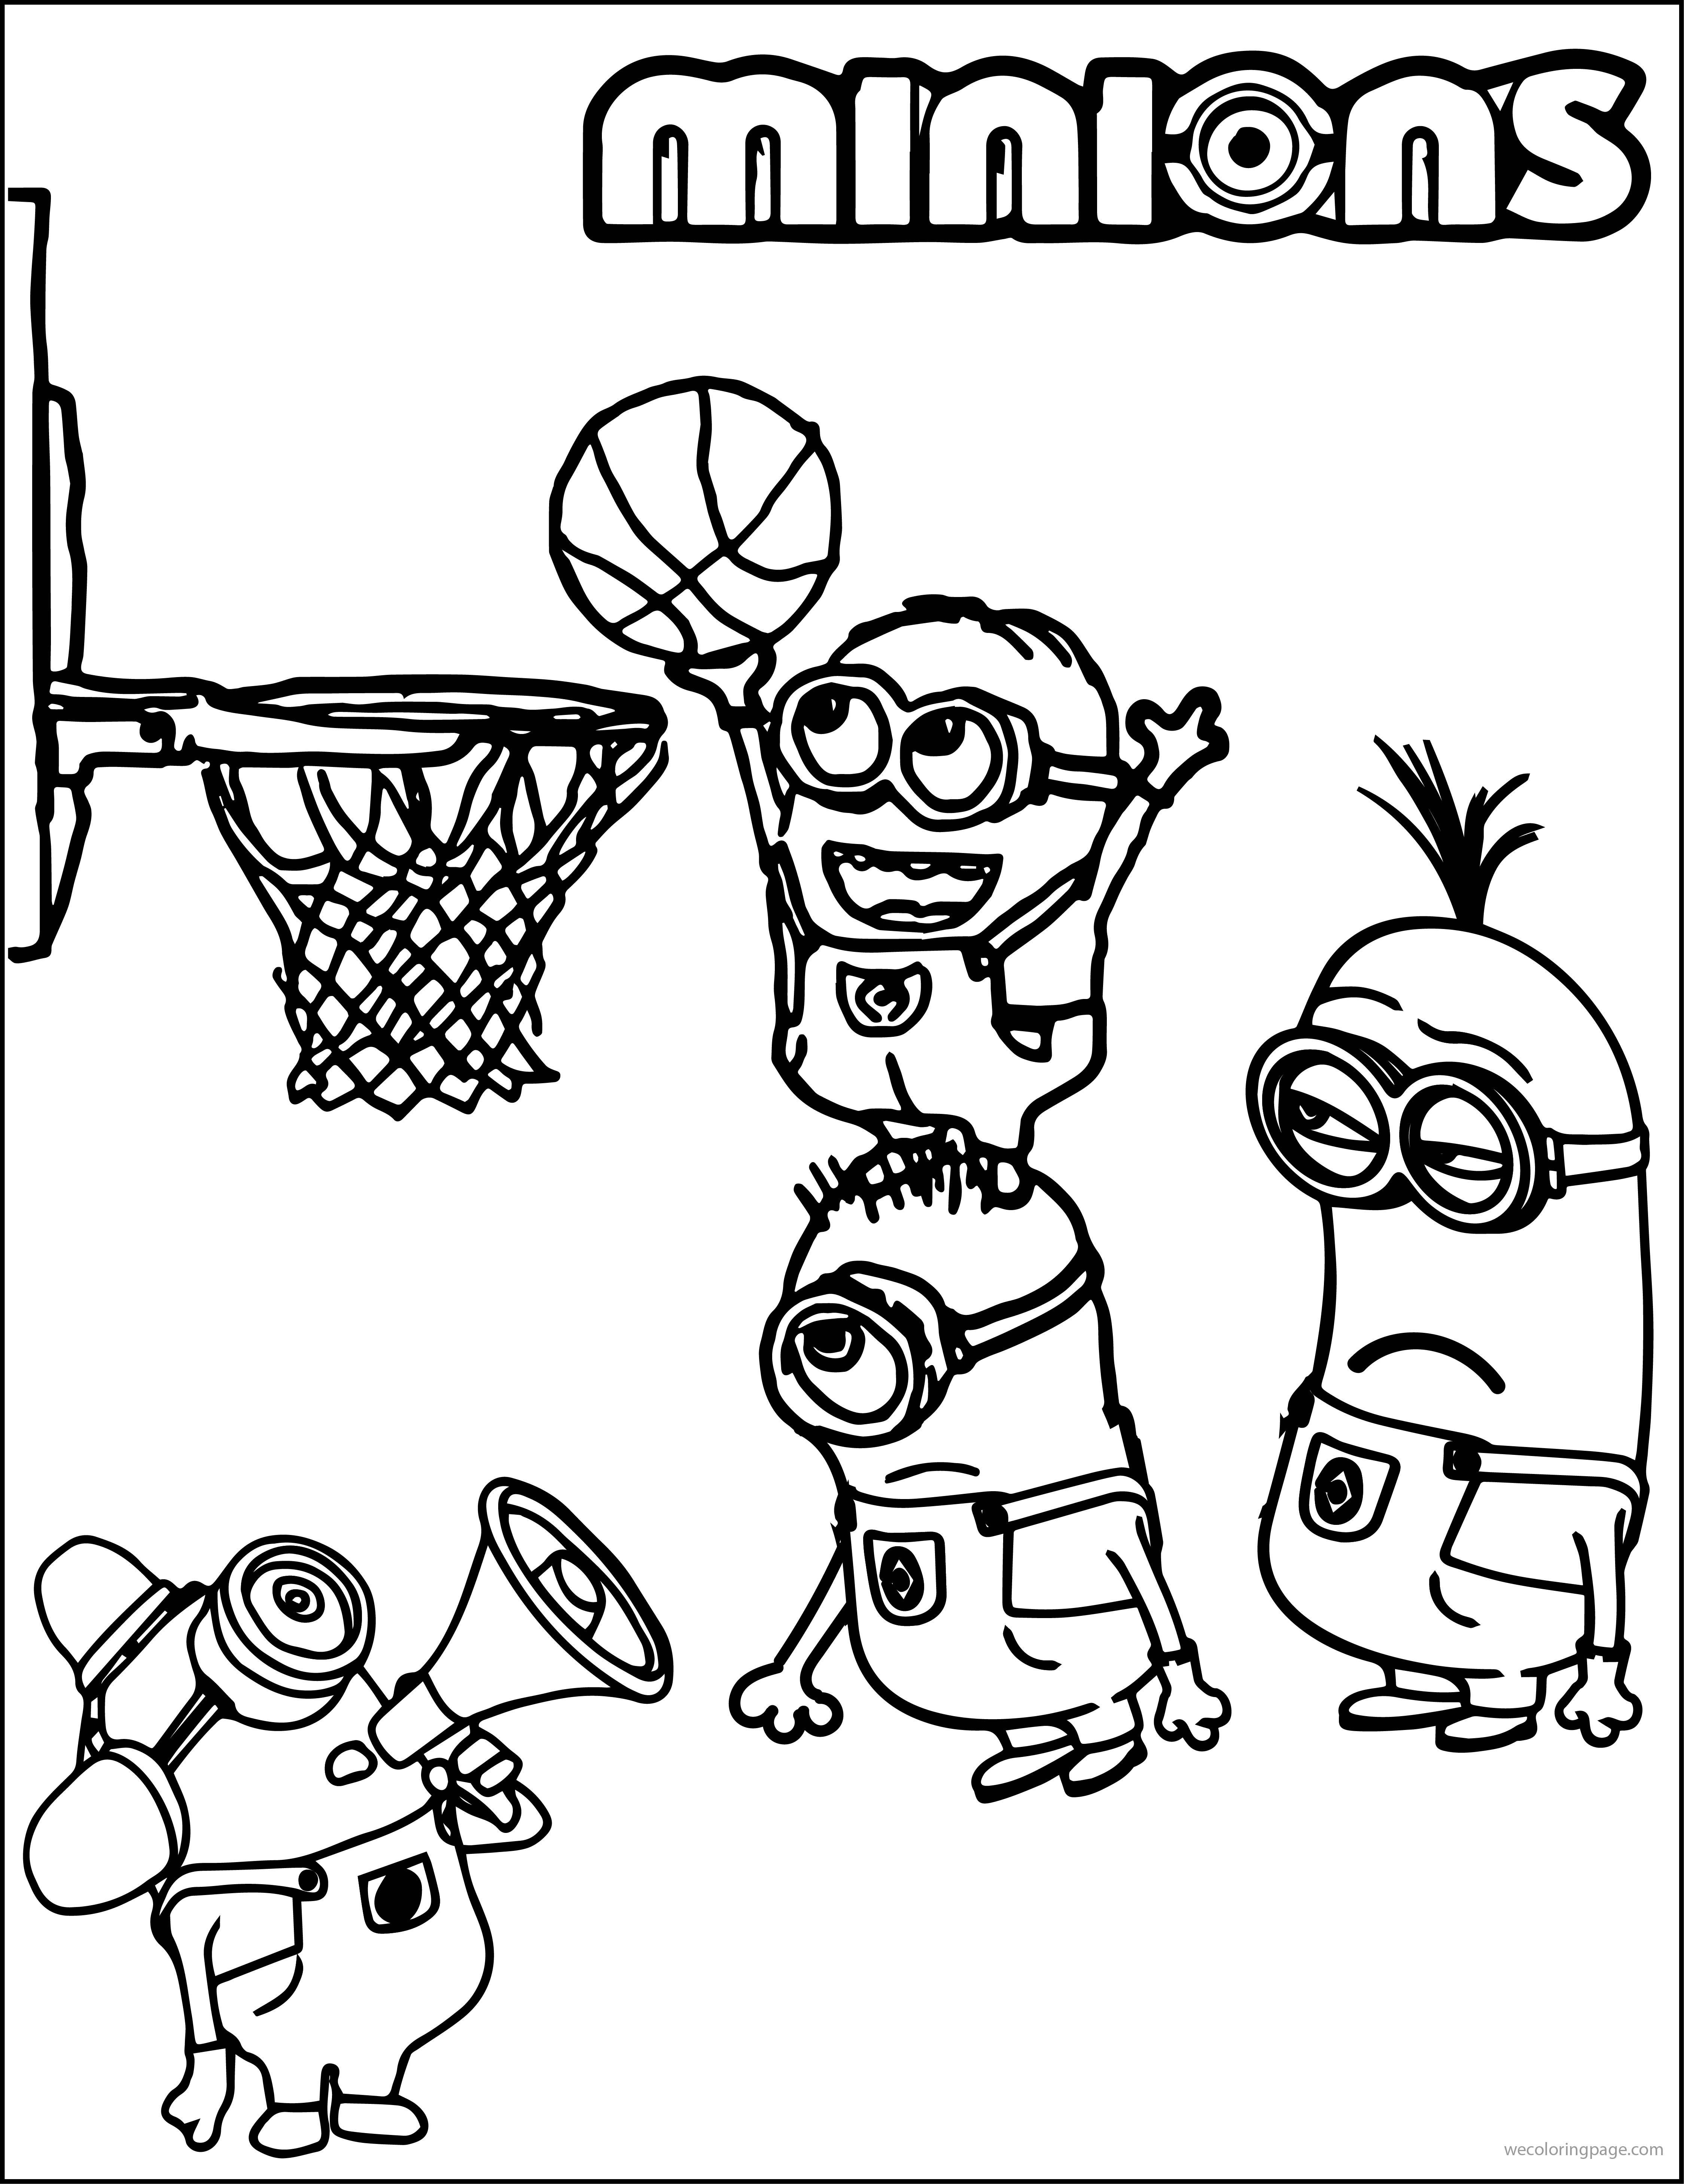 Basketball Duck Coloring Sheets For Boys
 Minion Playing Basketball Coloring Pages